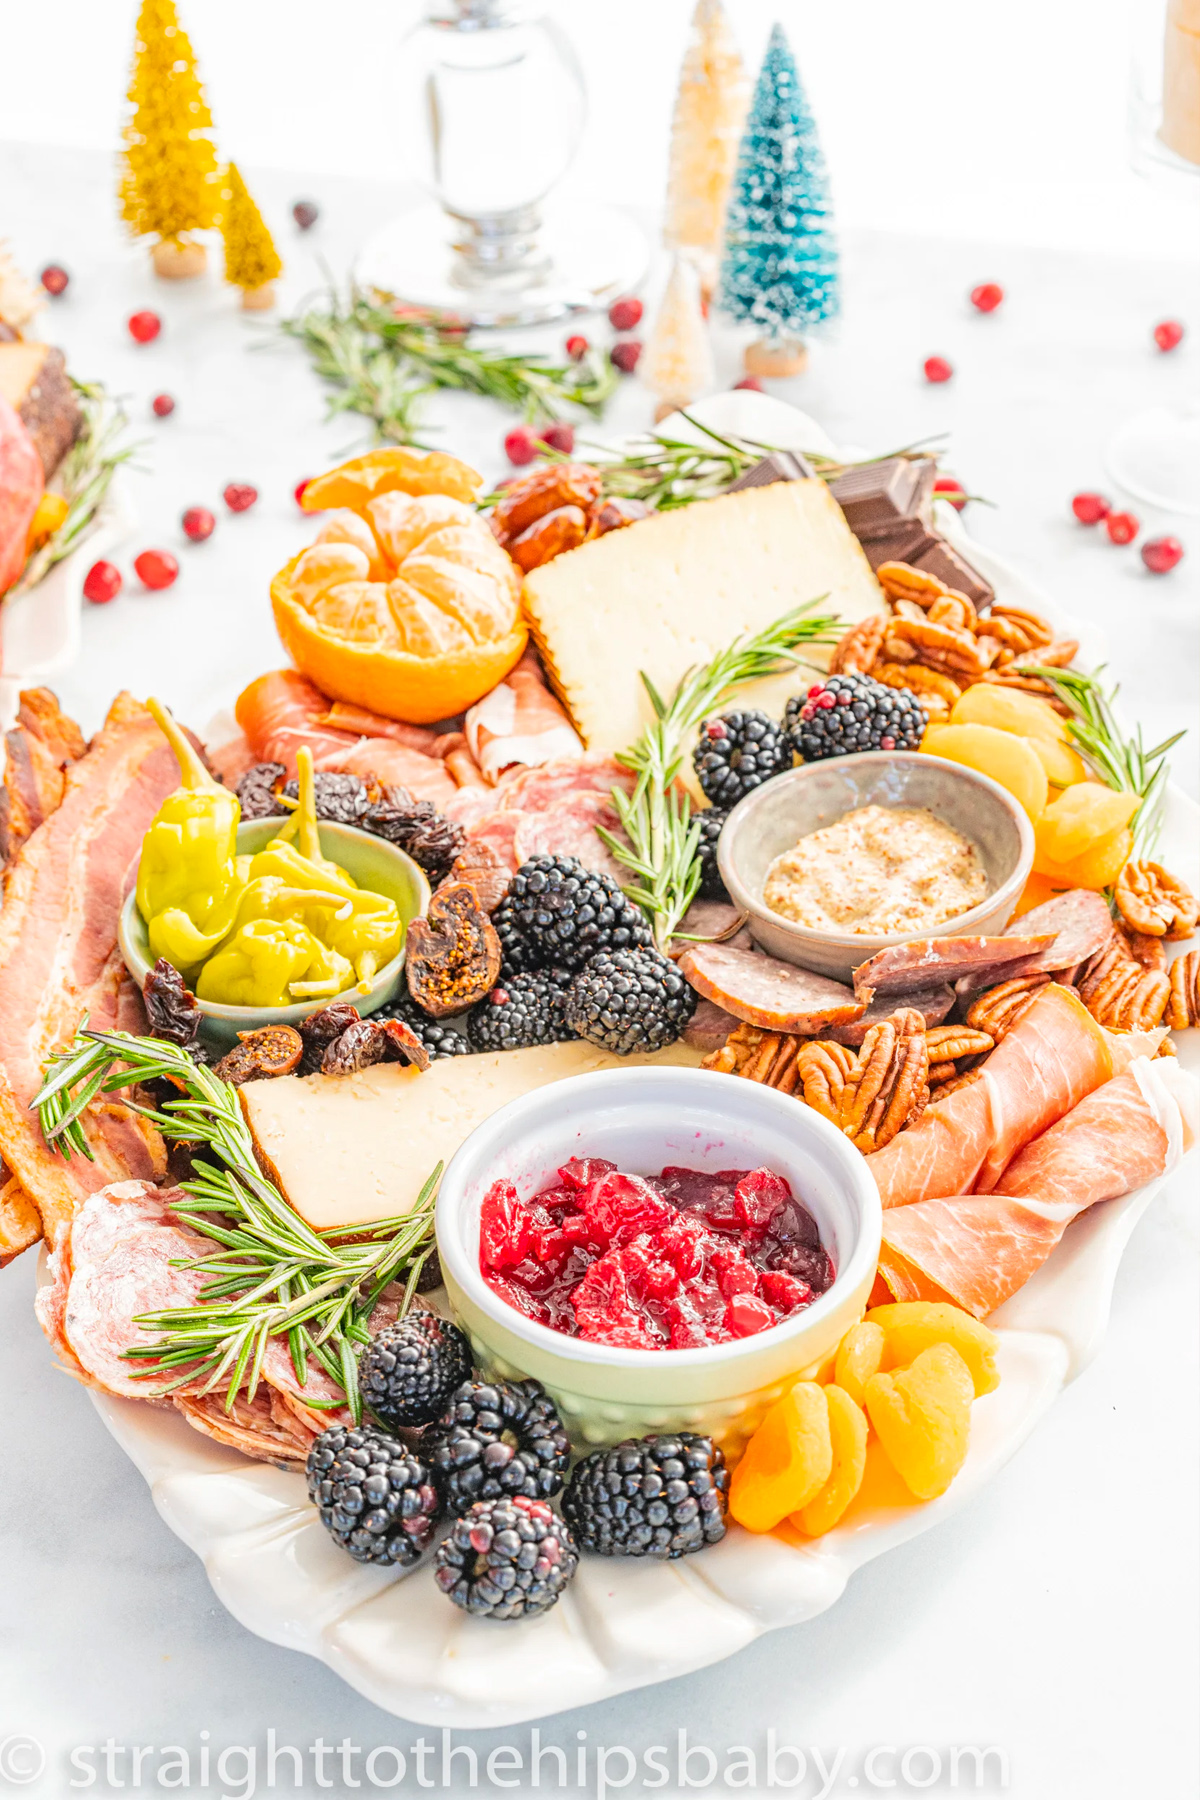 Straight to the Hips, Baby's winter charcuterie board is complete with berries, meat, cheese, seasonal fruit, and nuts.